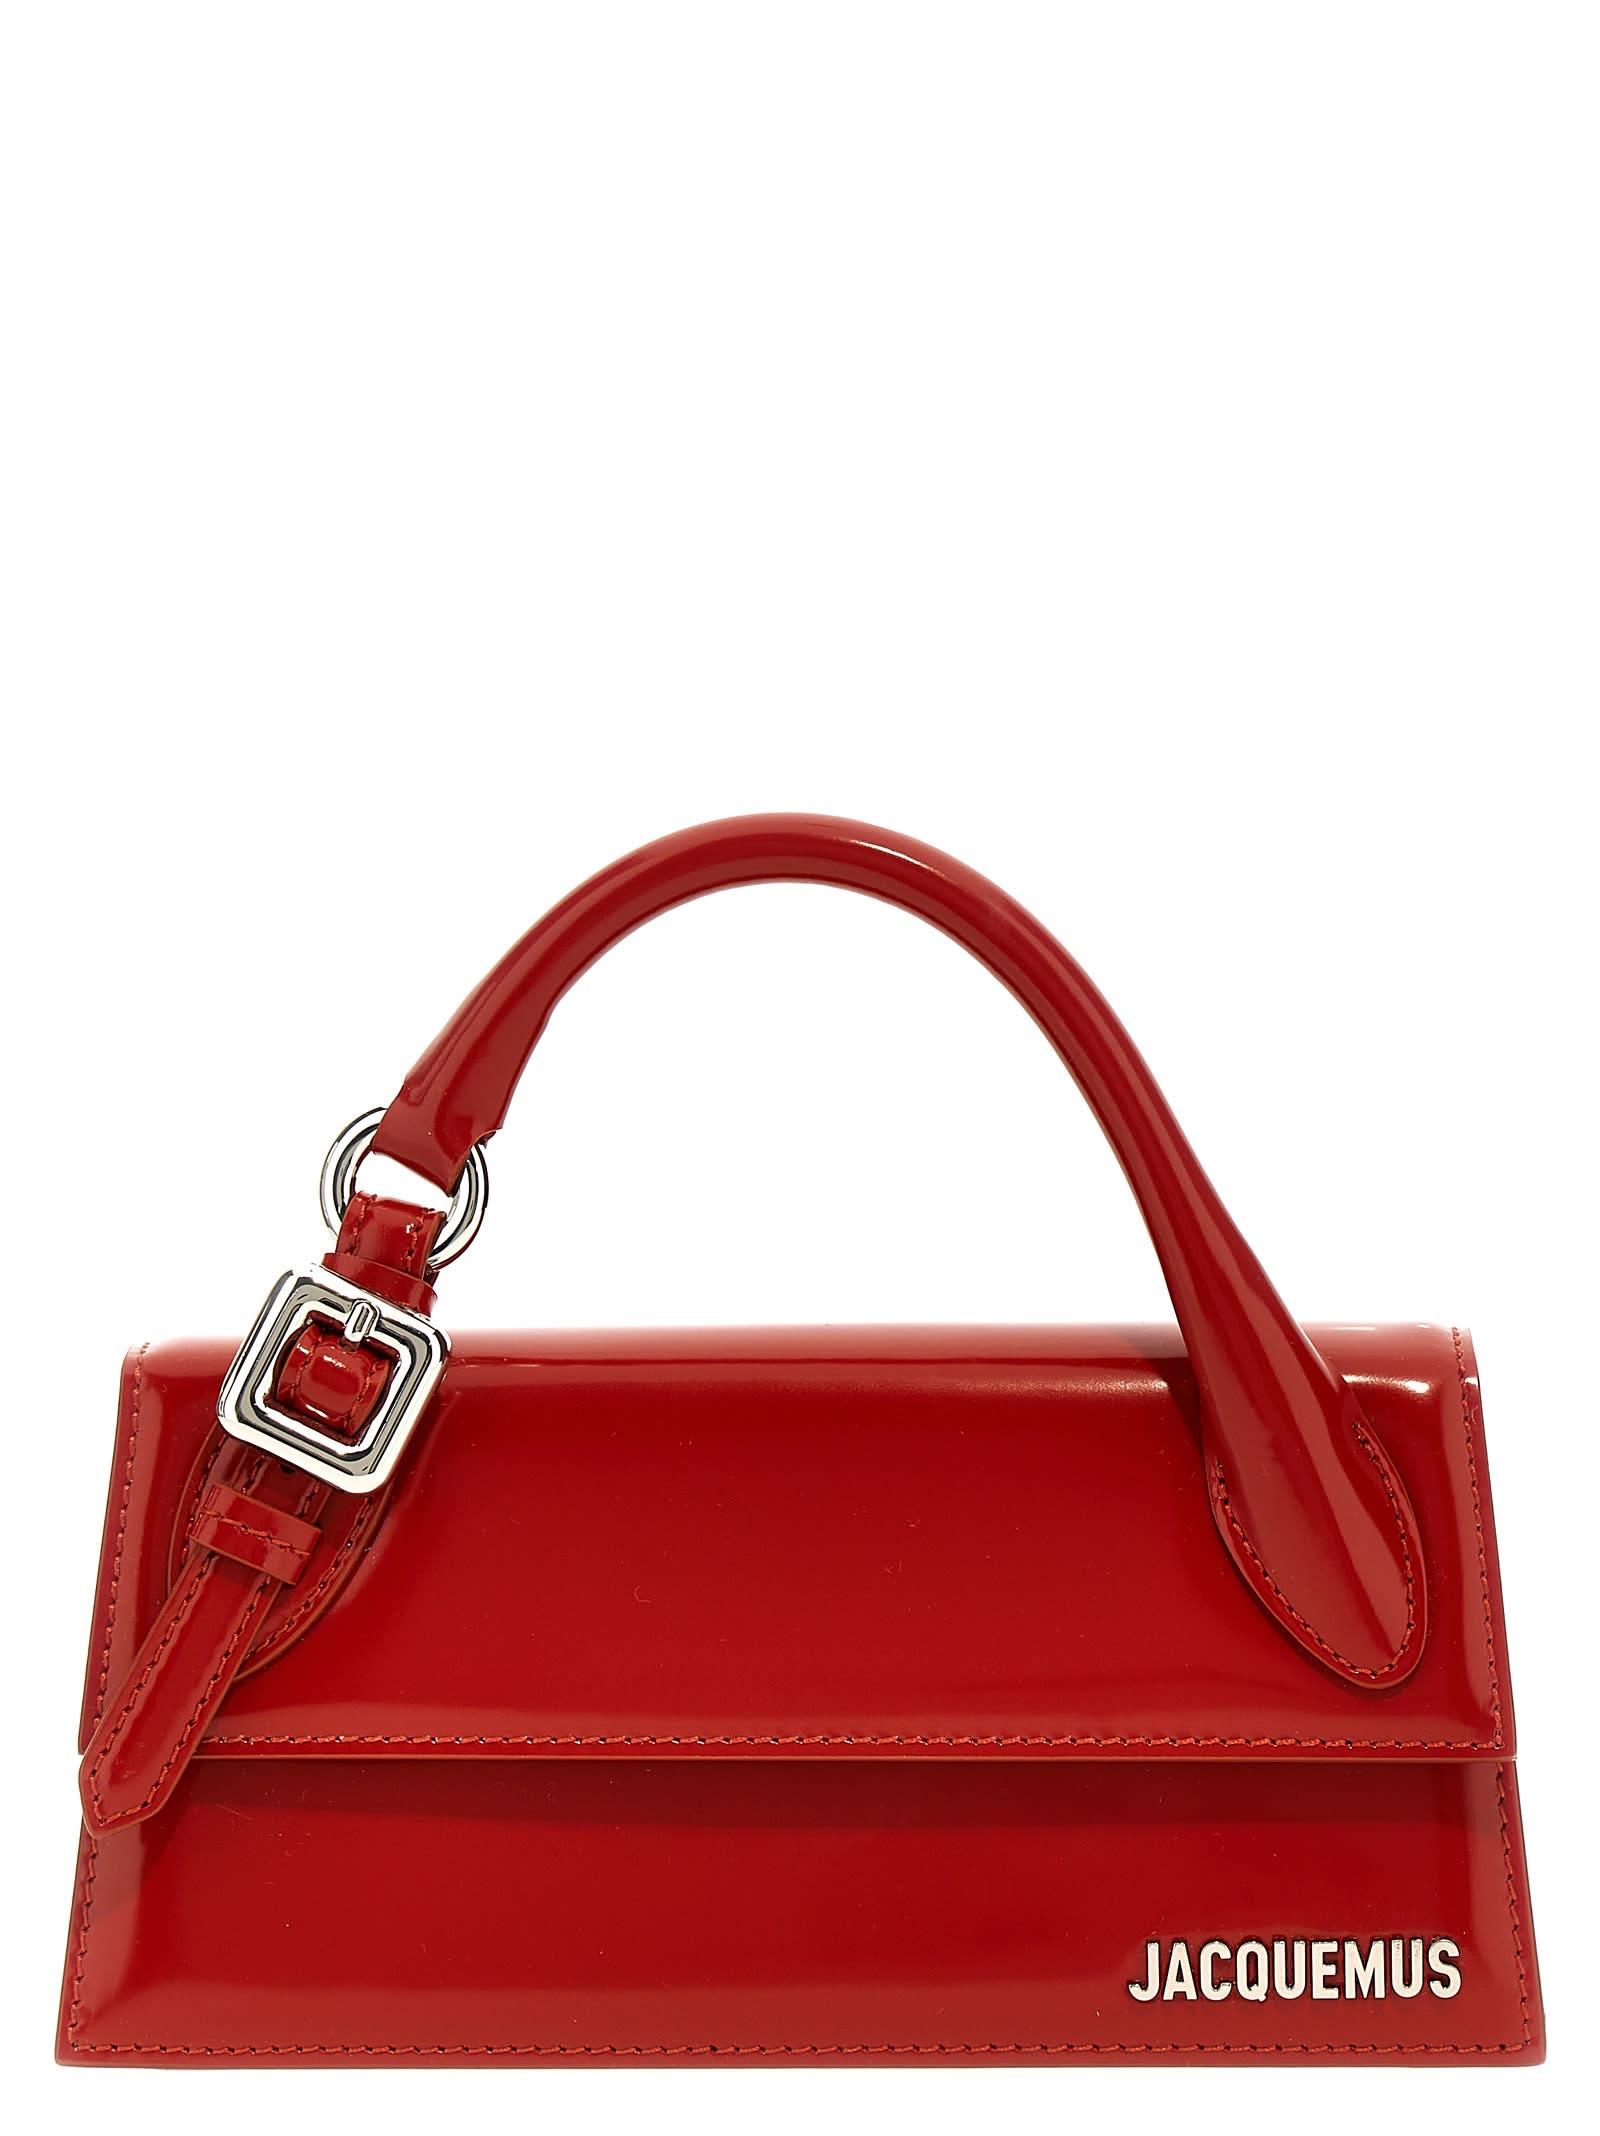 Jacquemus Le Chiquito Long Boucle Top Handle Bag in Red